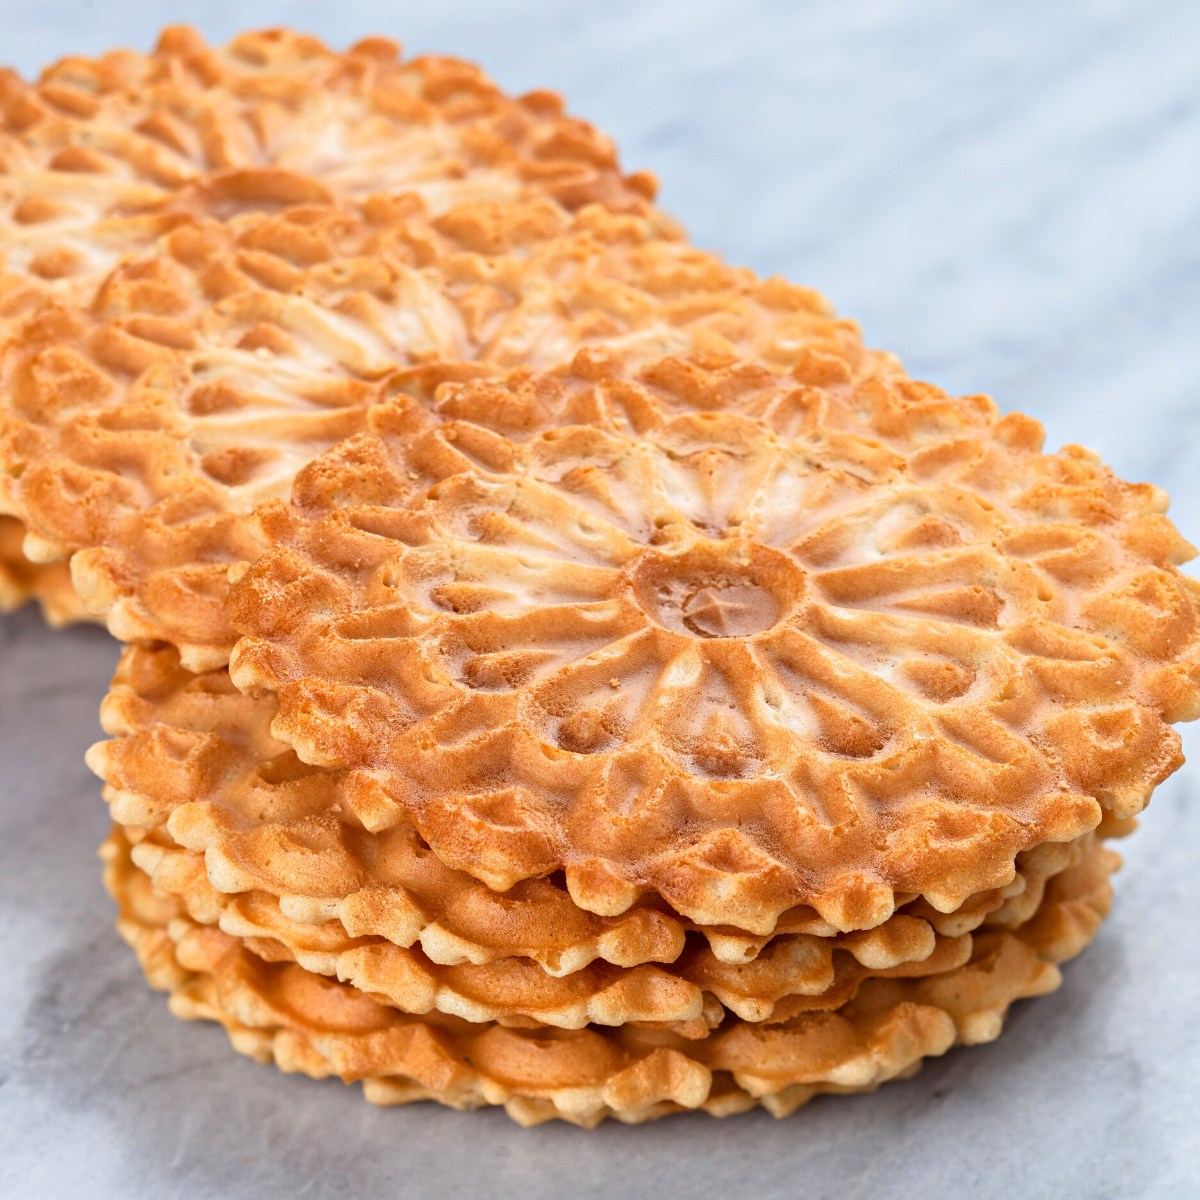 Italian Pizzelle Cookies Recipe (The Oldest Known Cookie)